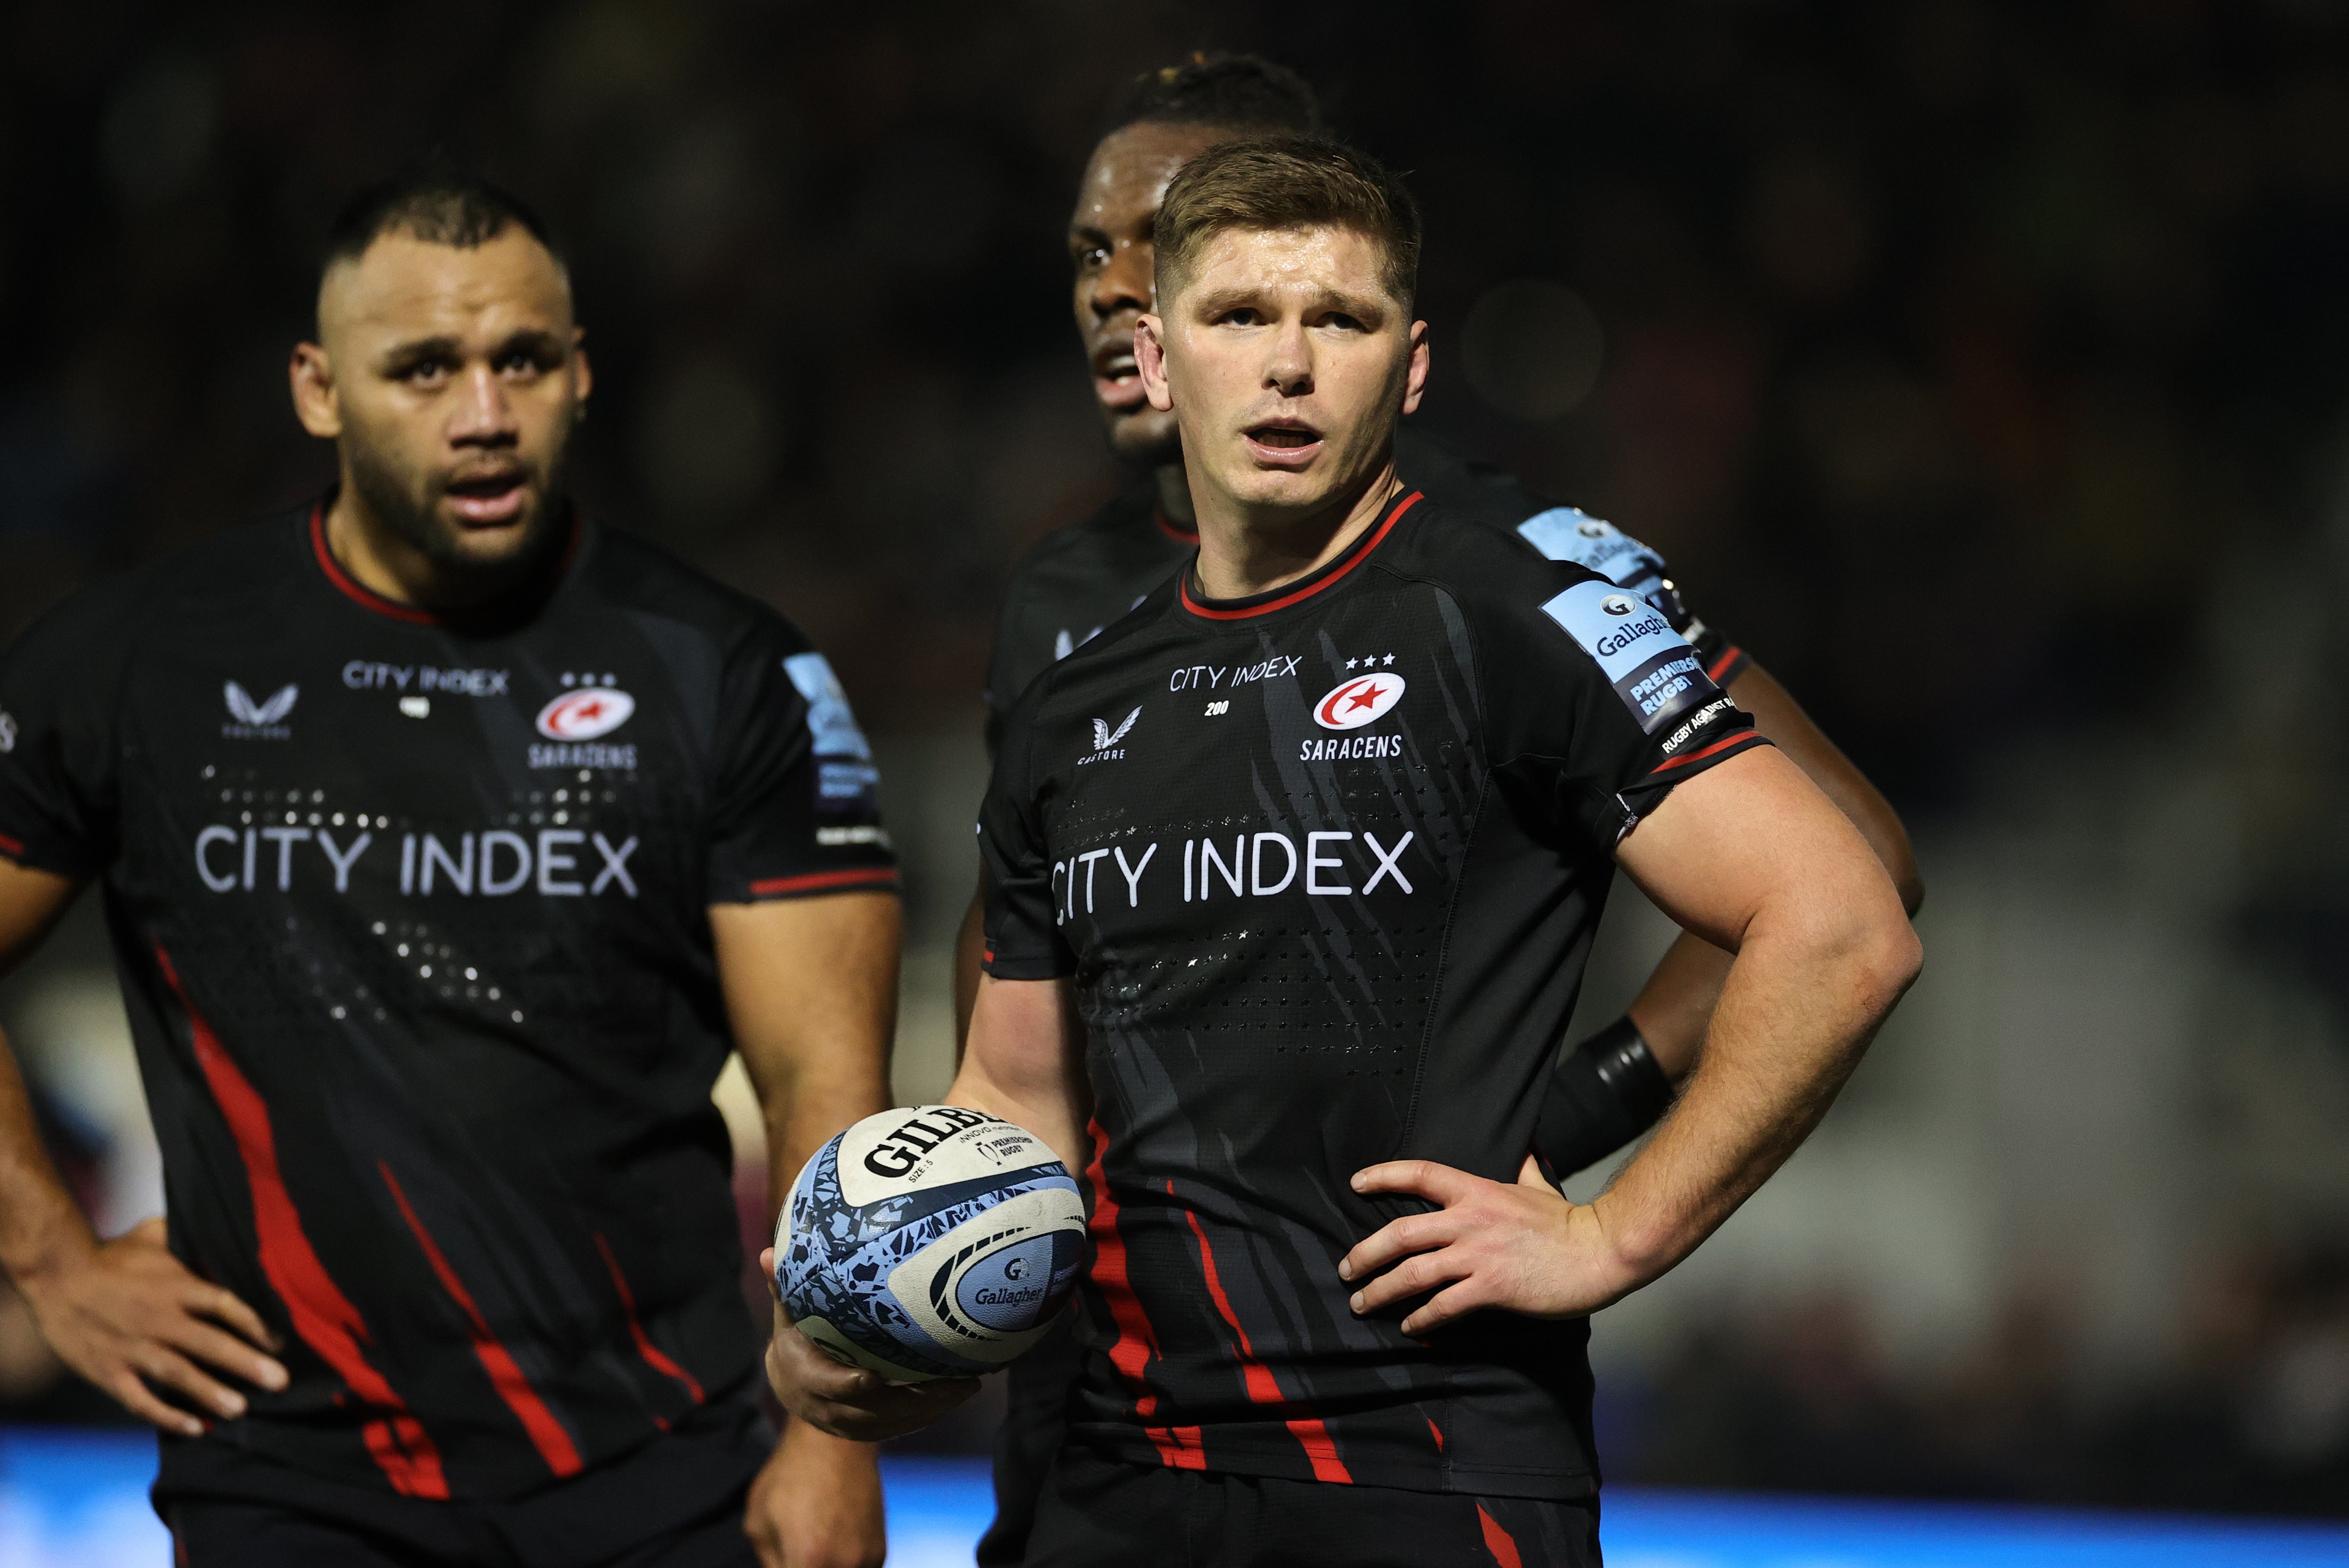 Owen Farrell will take a break from international rugby during the Six Nations